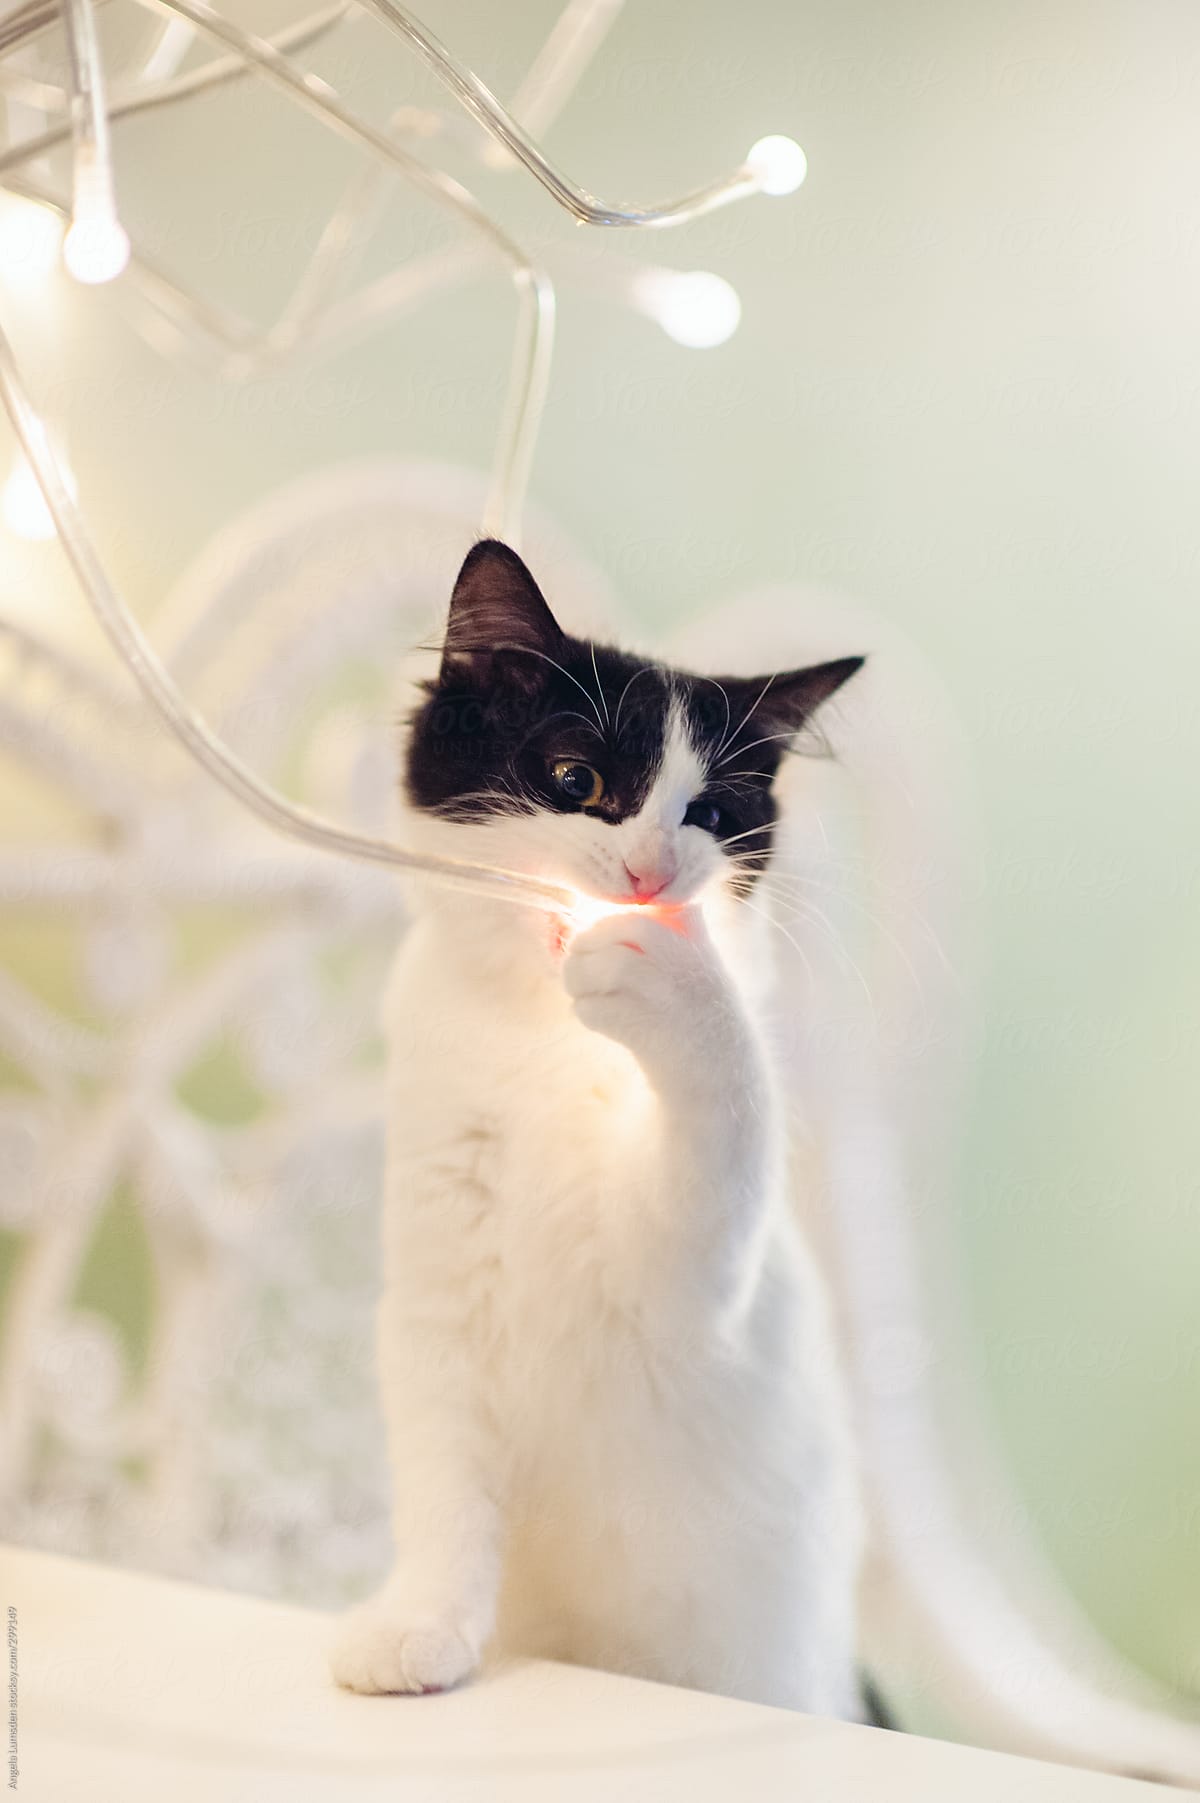 Kitten playing with decorative lighting